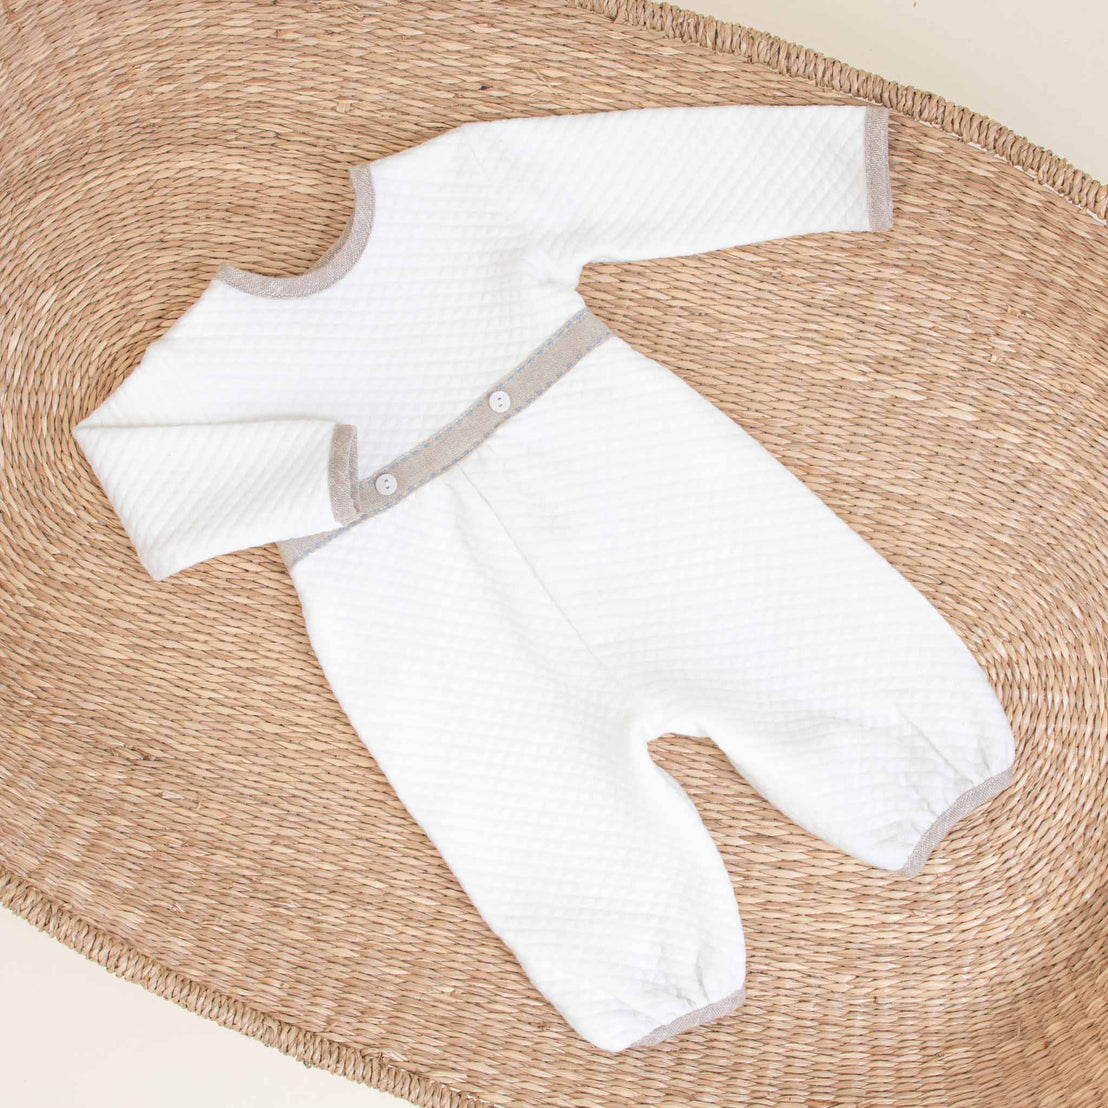 A white Austin Romper with a gray trim, perfect as a coming home outfit, is displayed on a boutique-style circular rattan mat against a cream background.